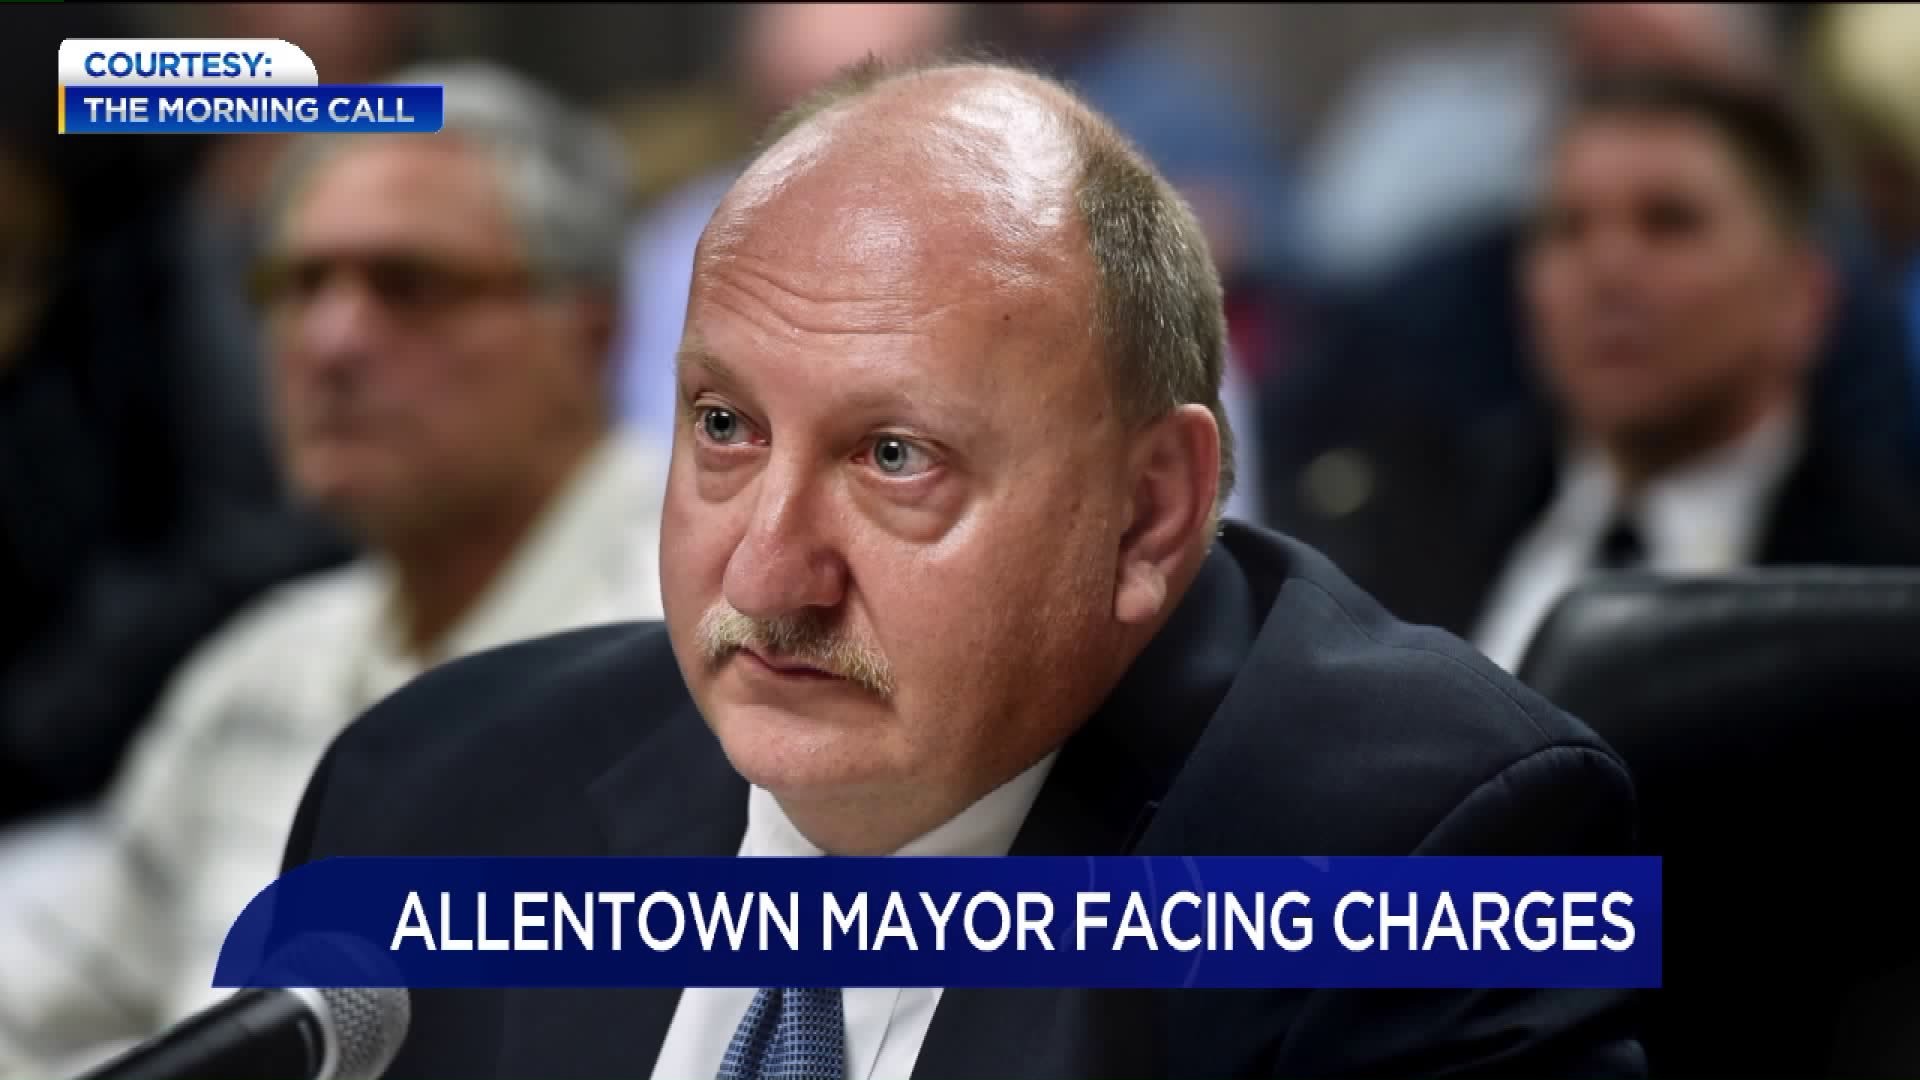 Allentown Mayor Facing Charges